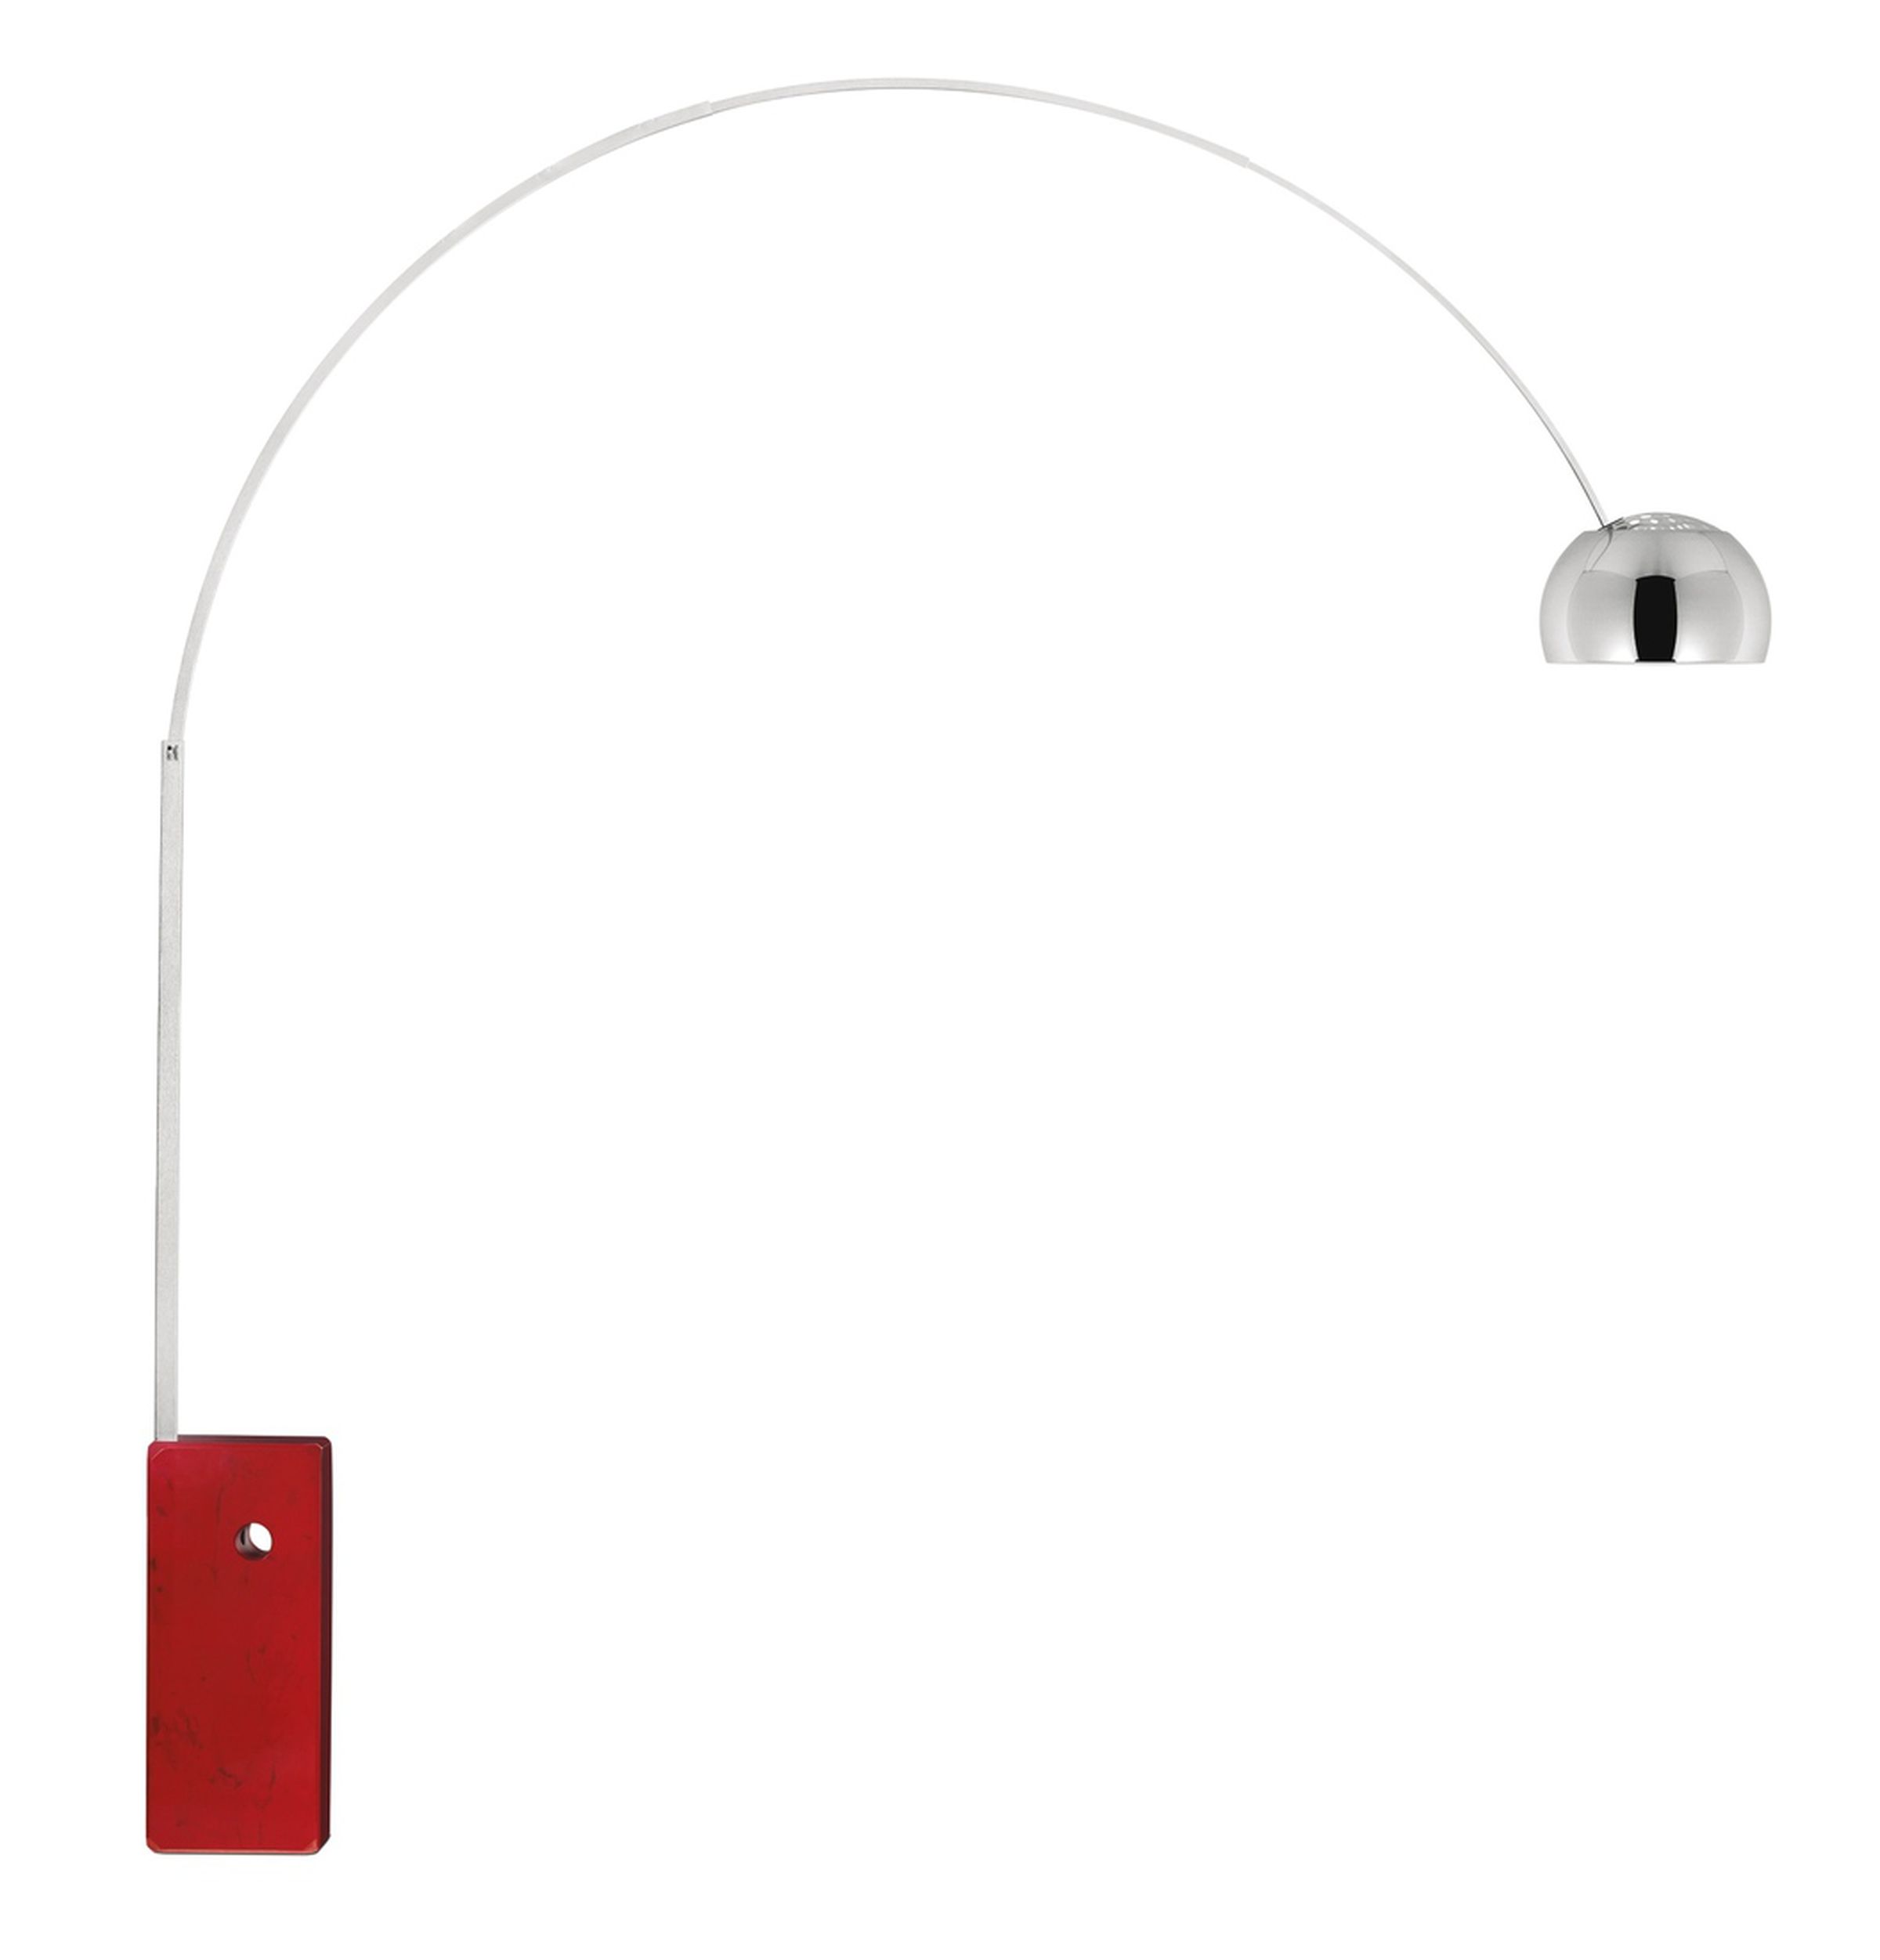 Jony Ive and Marc Newson's designed and customized items for Red